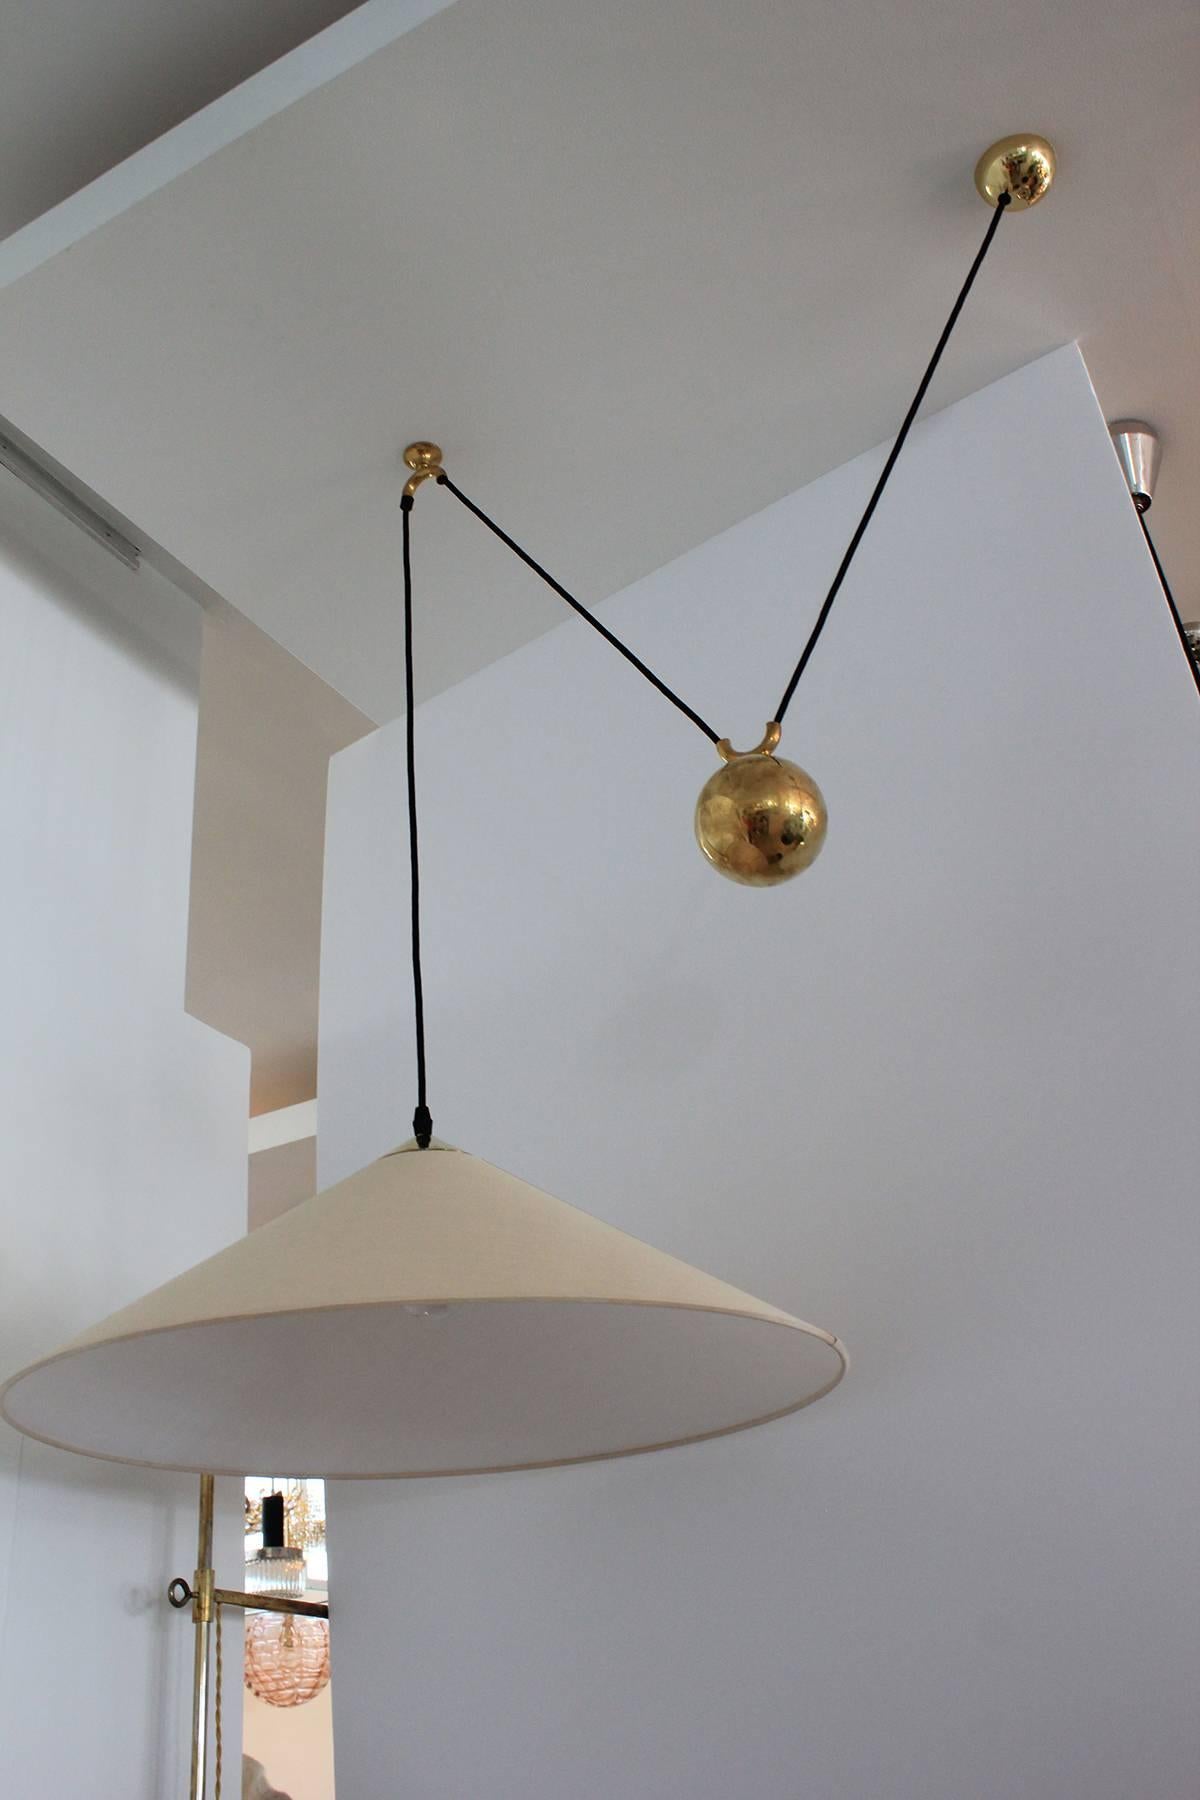 Florian Schulz pendant with counterbalance brass ball with new white silk shade. Newly rewired with black silk cord.
